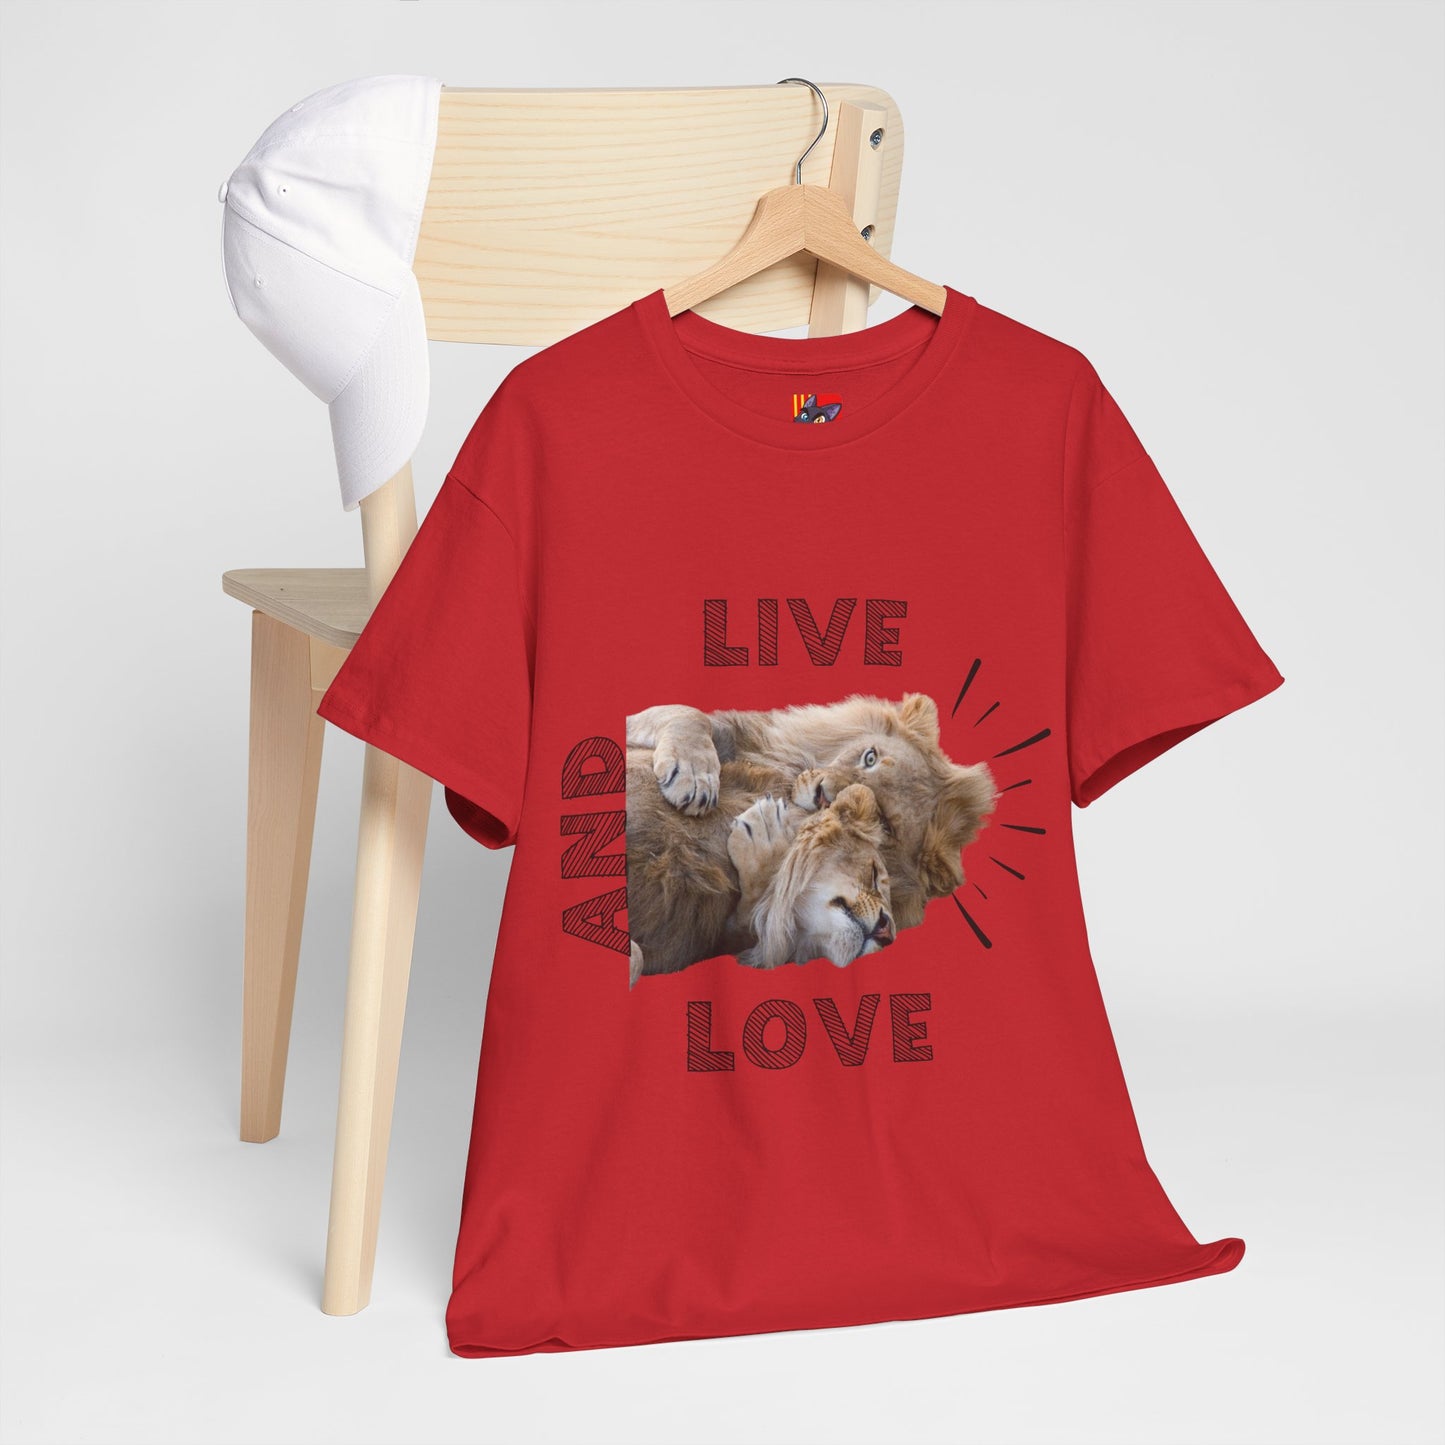 Live and Love: Simple Quote Tee